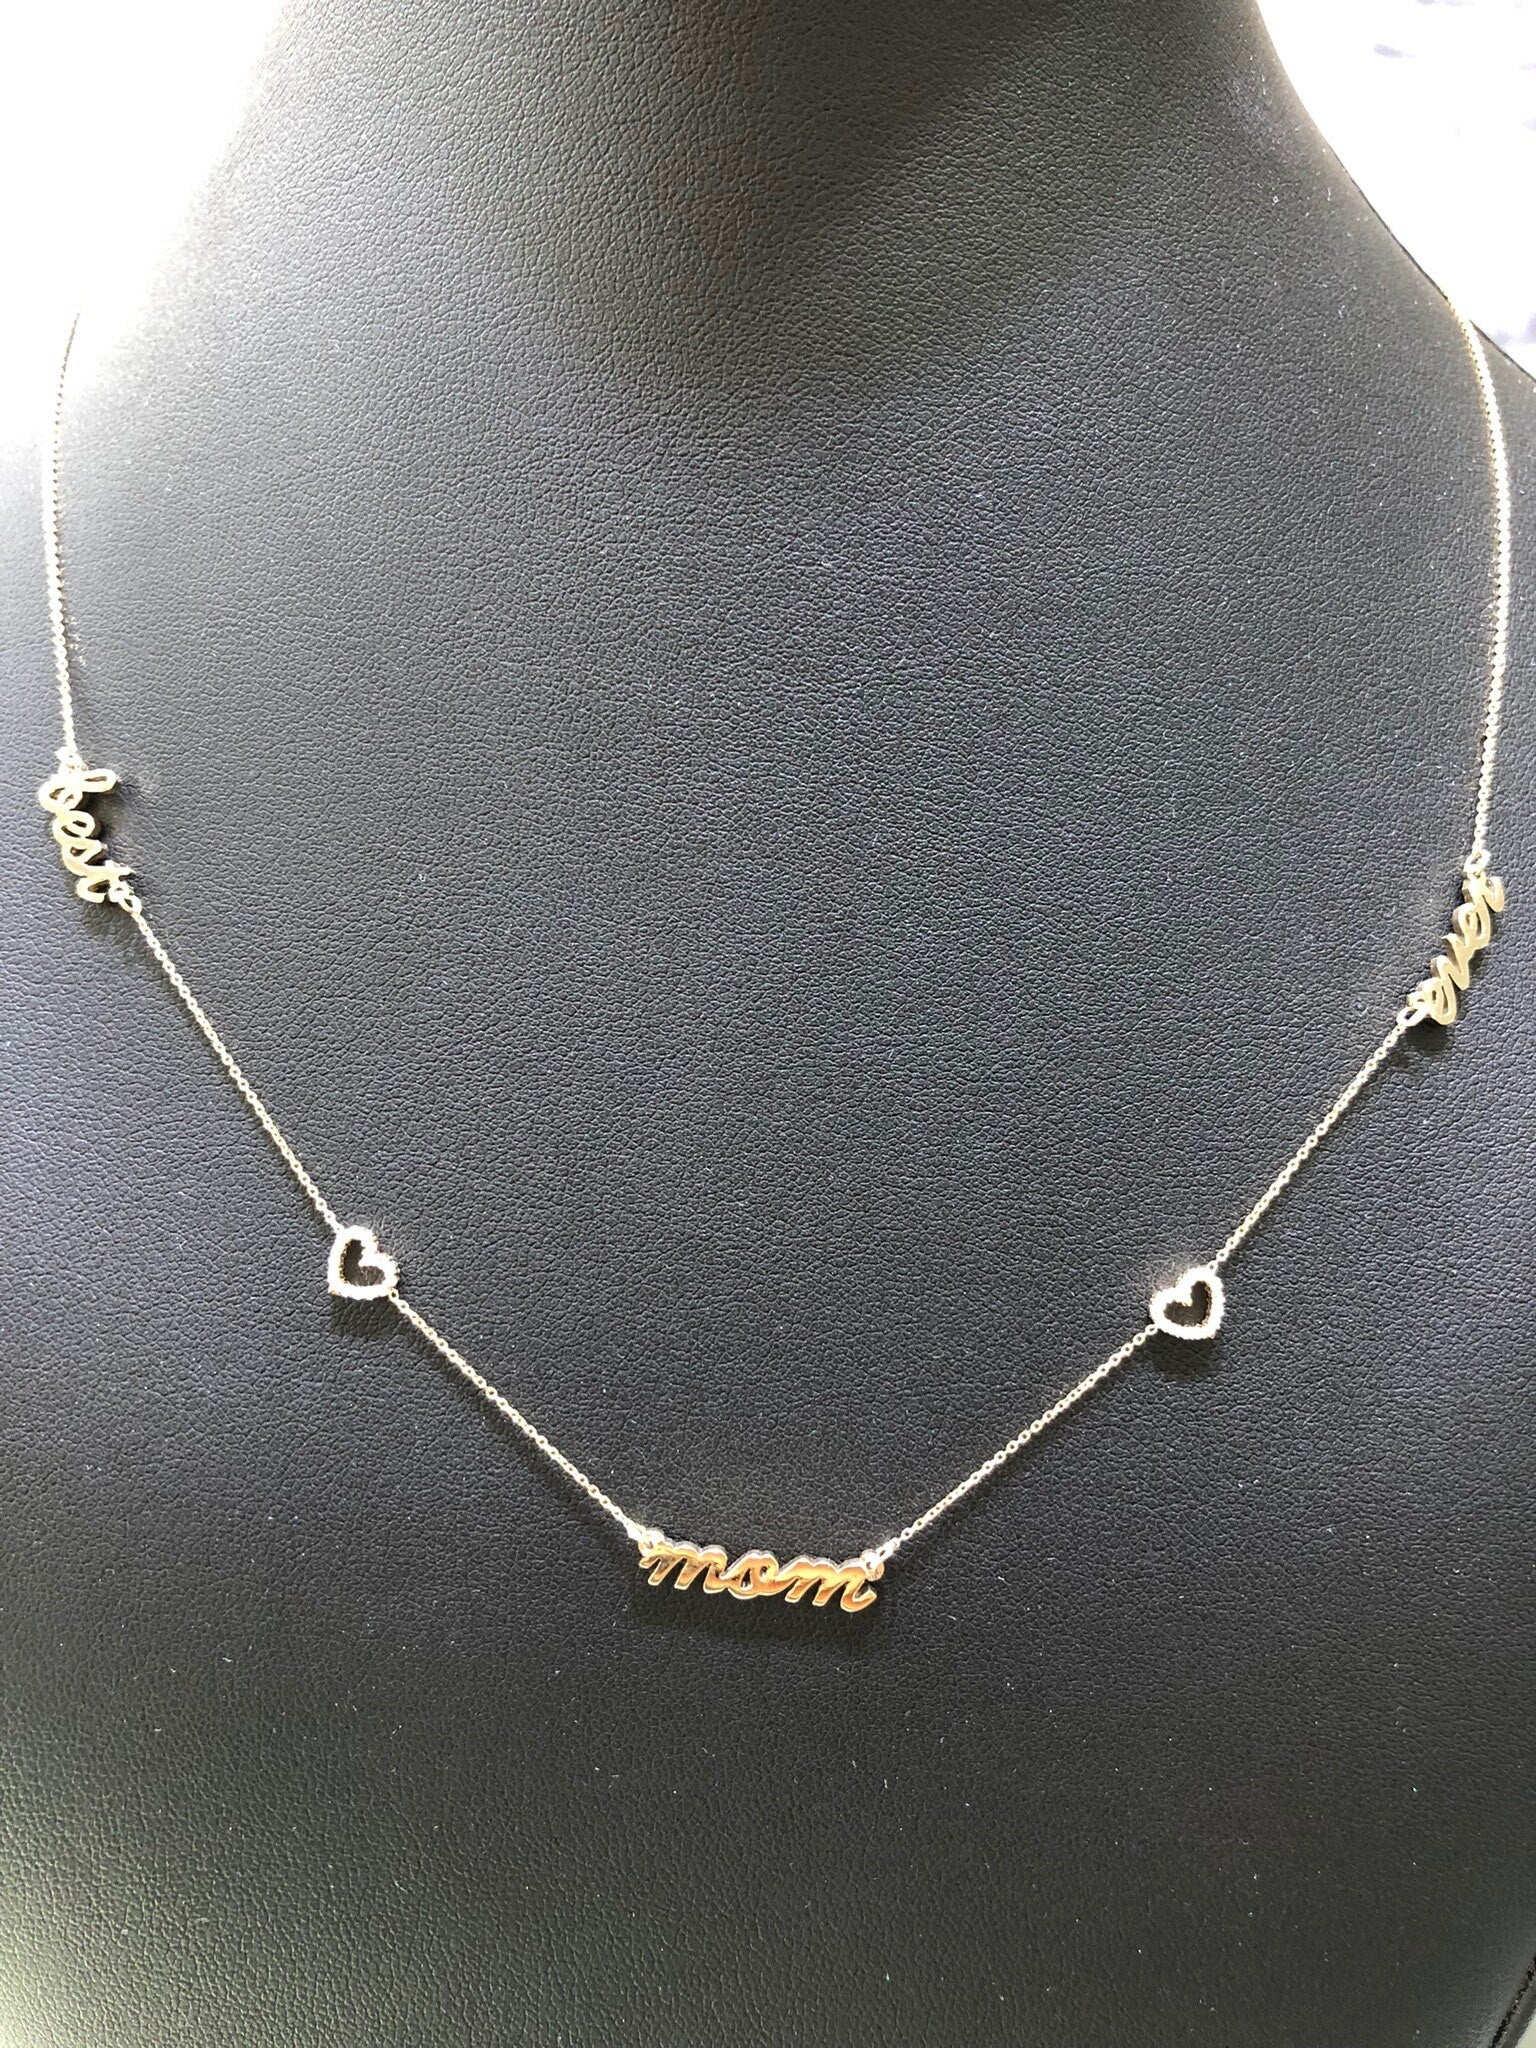 LIV 14K Yellow Gold Hand Made Natural Diamonds Best Mom Ever Heart Design Personalized Necklace Any Word or Phrase Available 16" Length